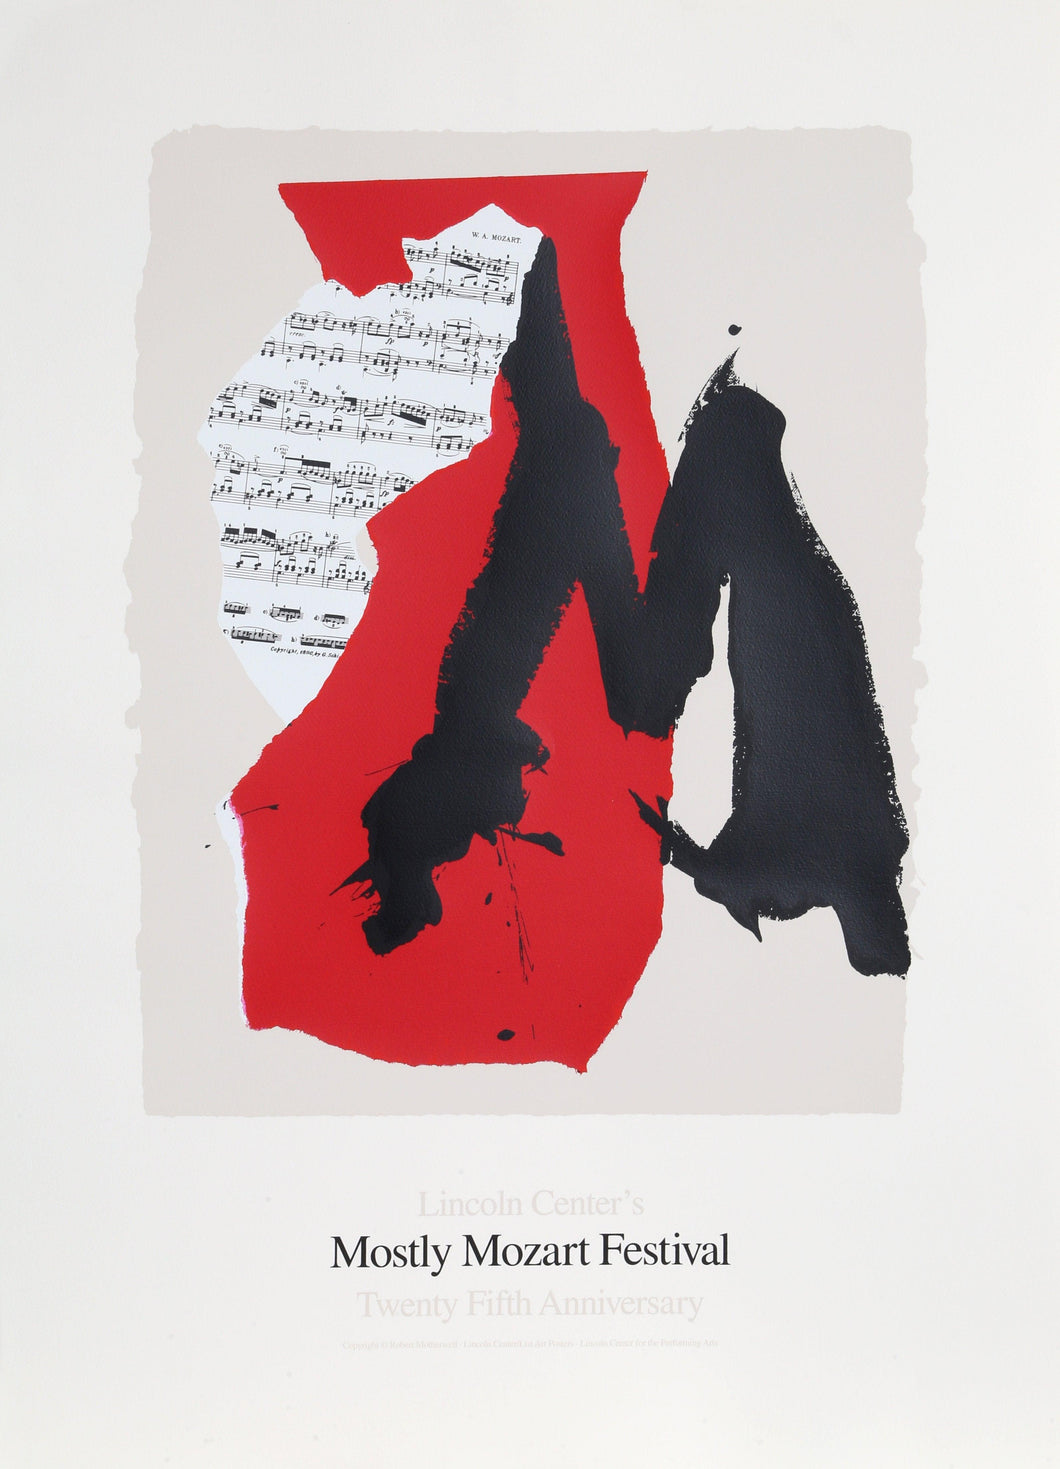 Lincoln Center Mostly Mozart, 25th Anniversary Lithograph | Robert Motherwell,{{product.type}}